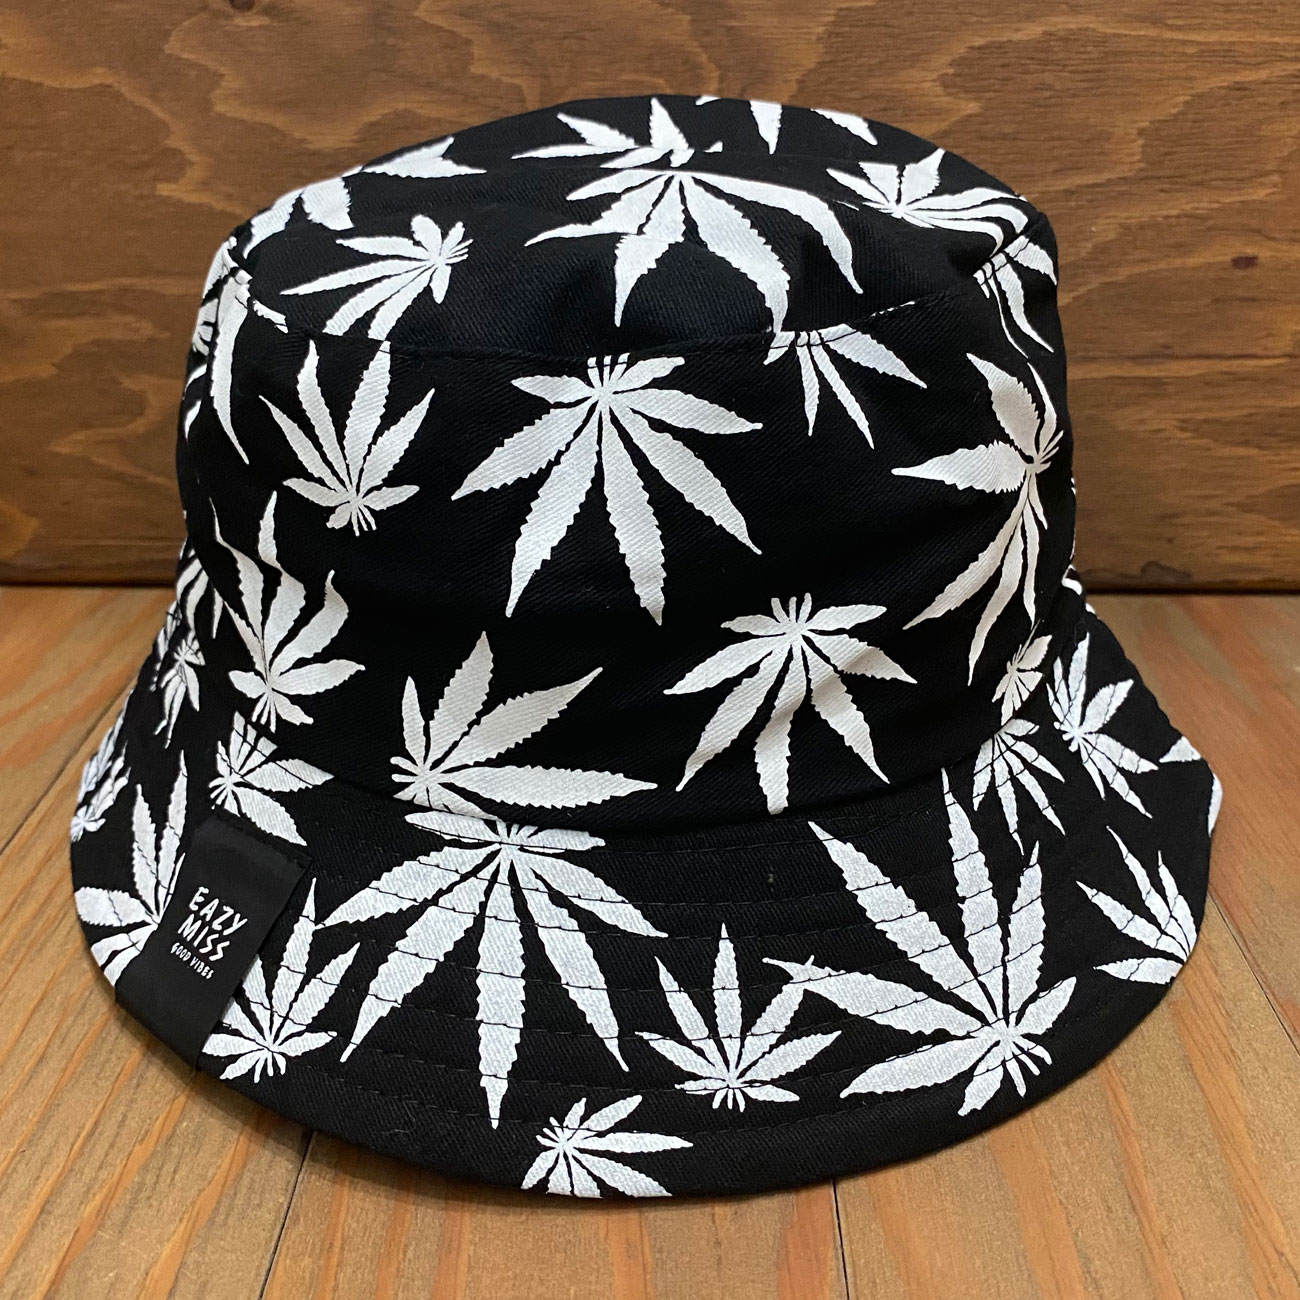 EAZY M!SS CANNABIS REVERSIBLE HAT